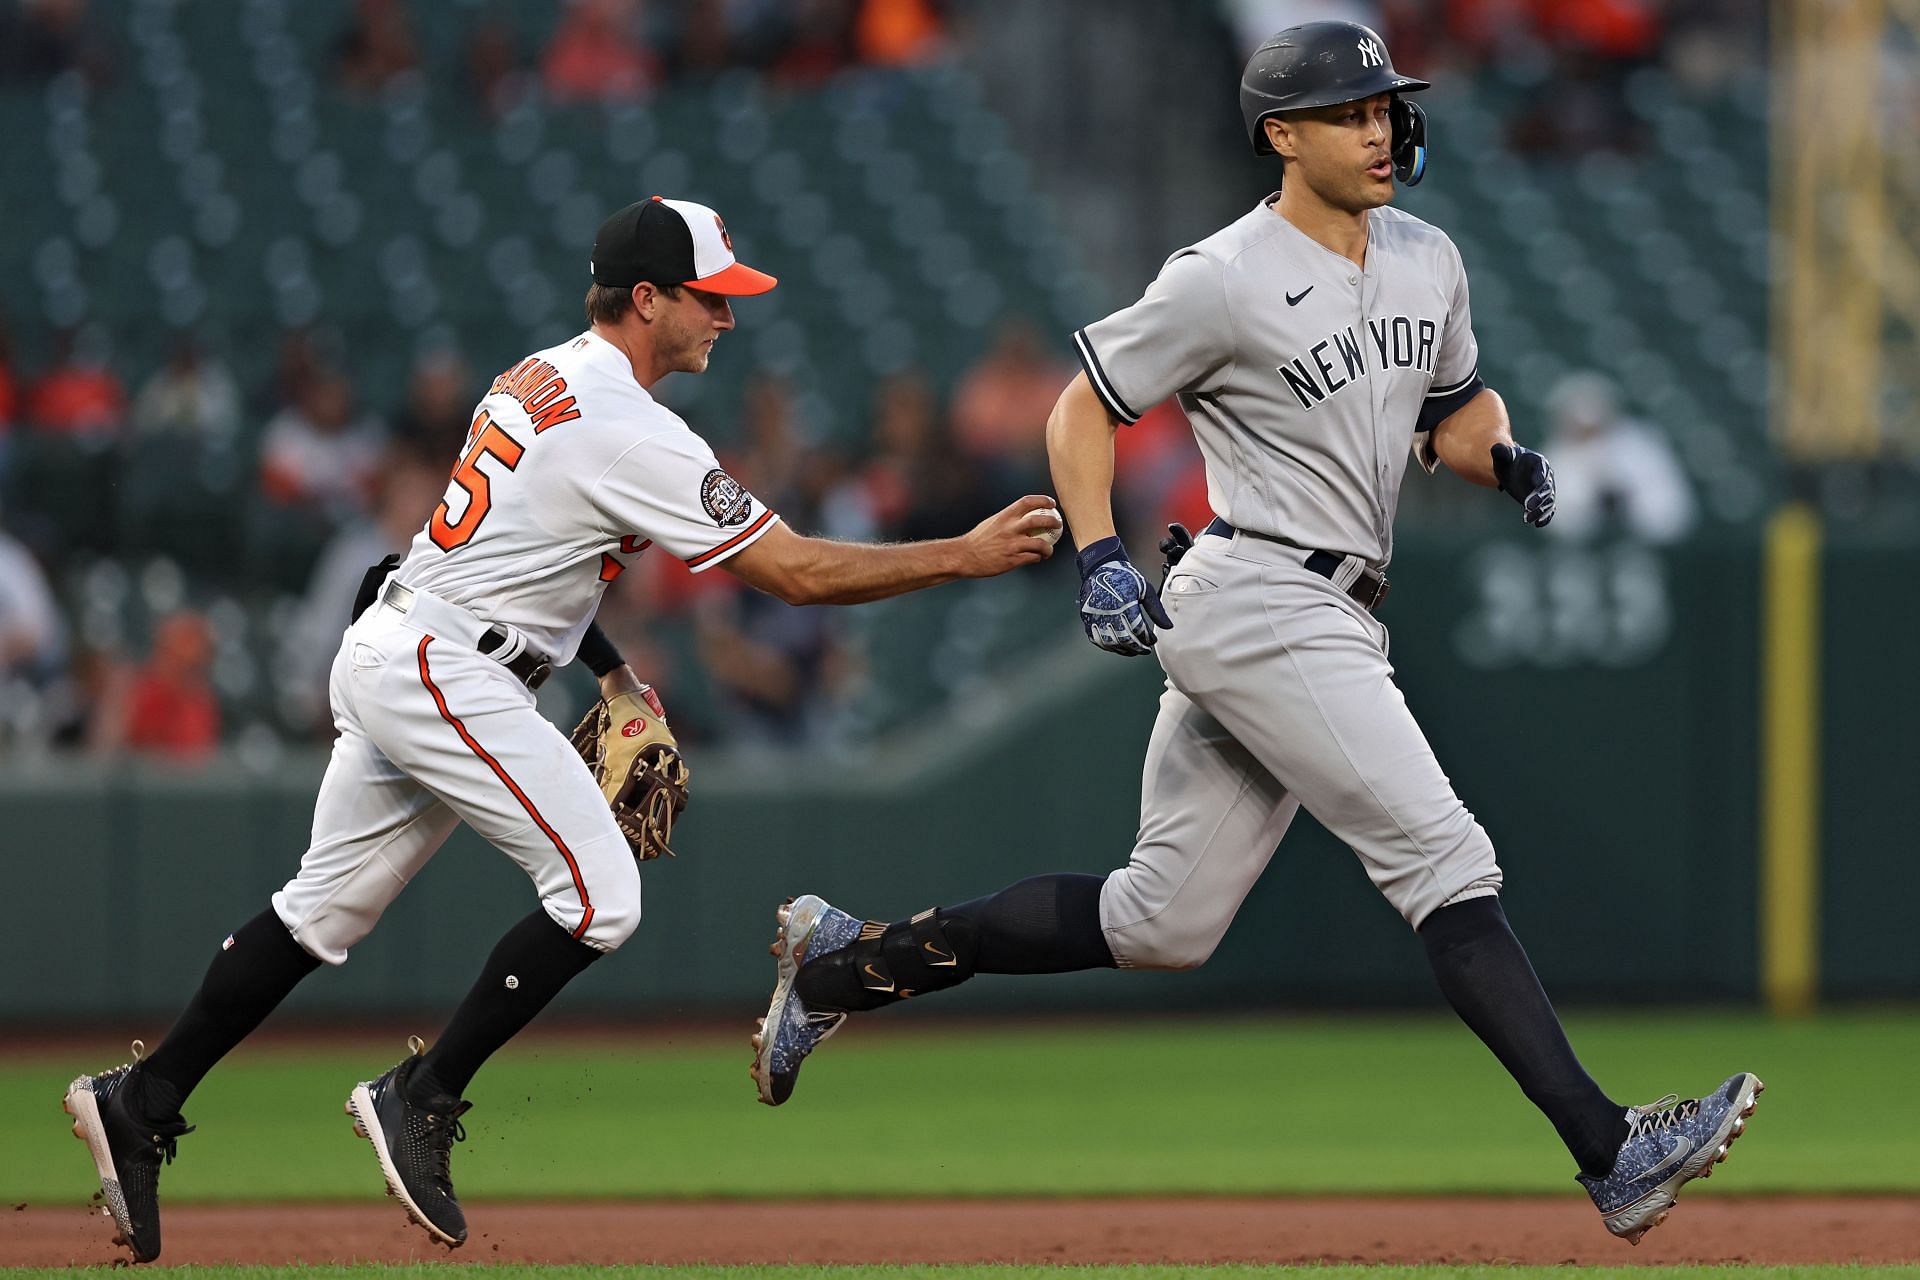 The Yankees and Orioles face off Tuesday.